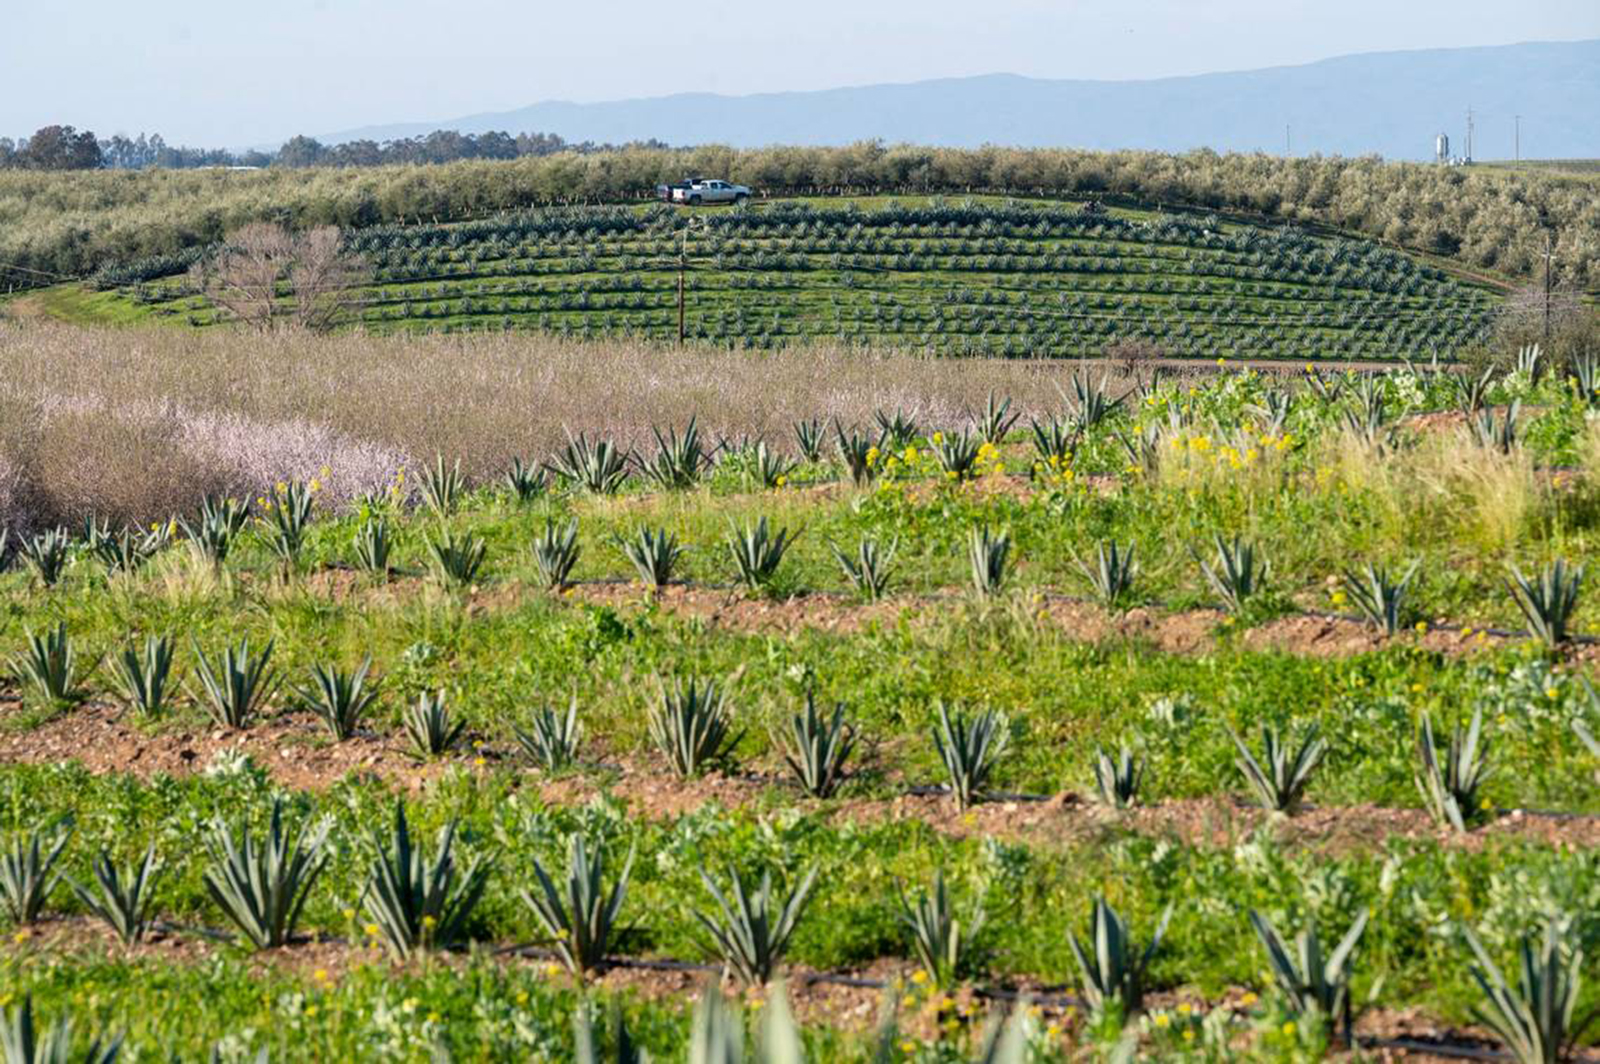 A field of agave grows